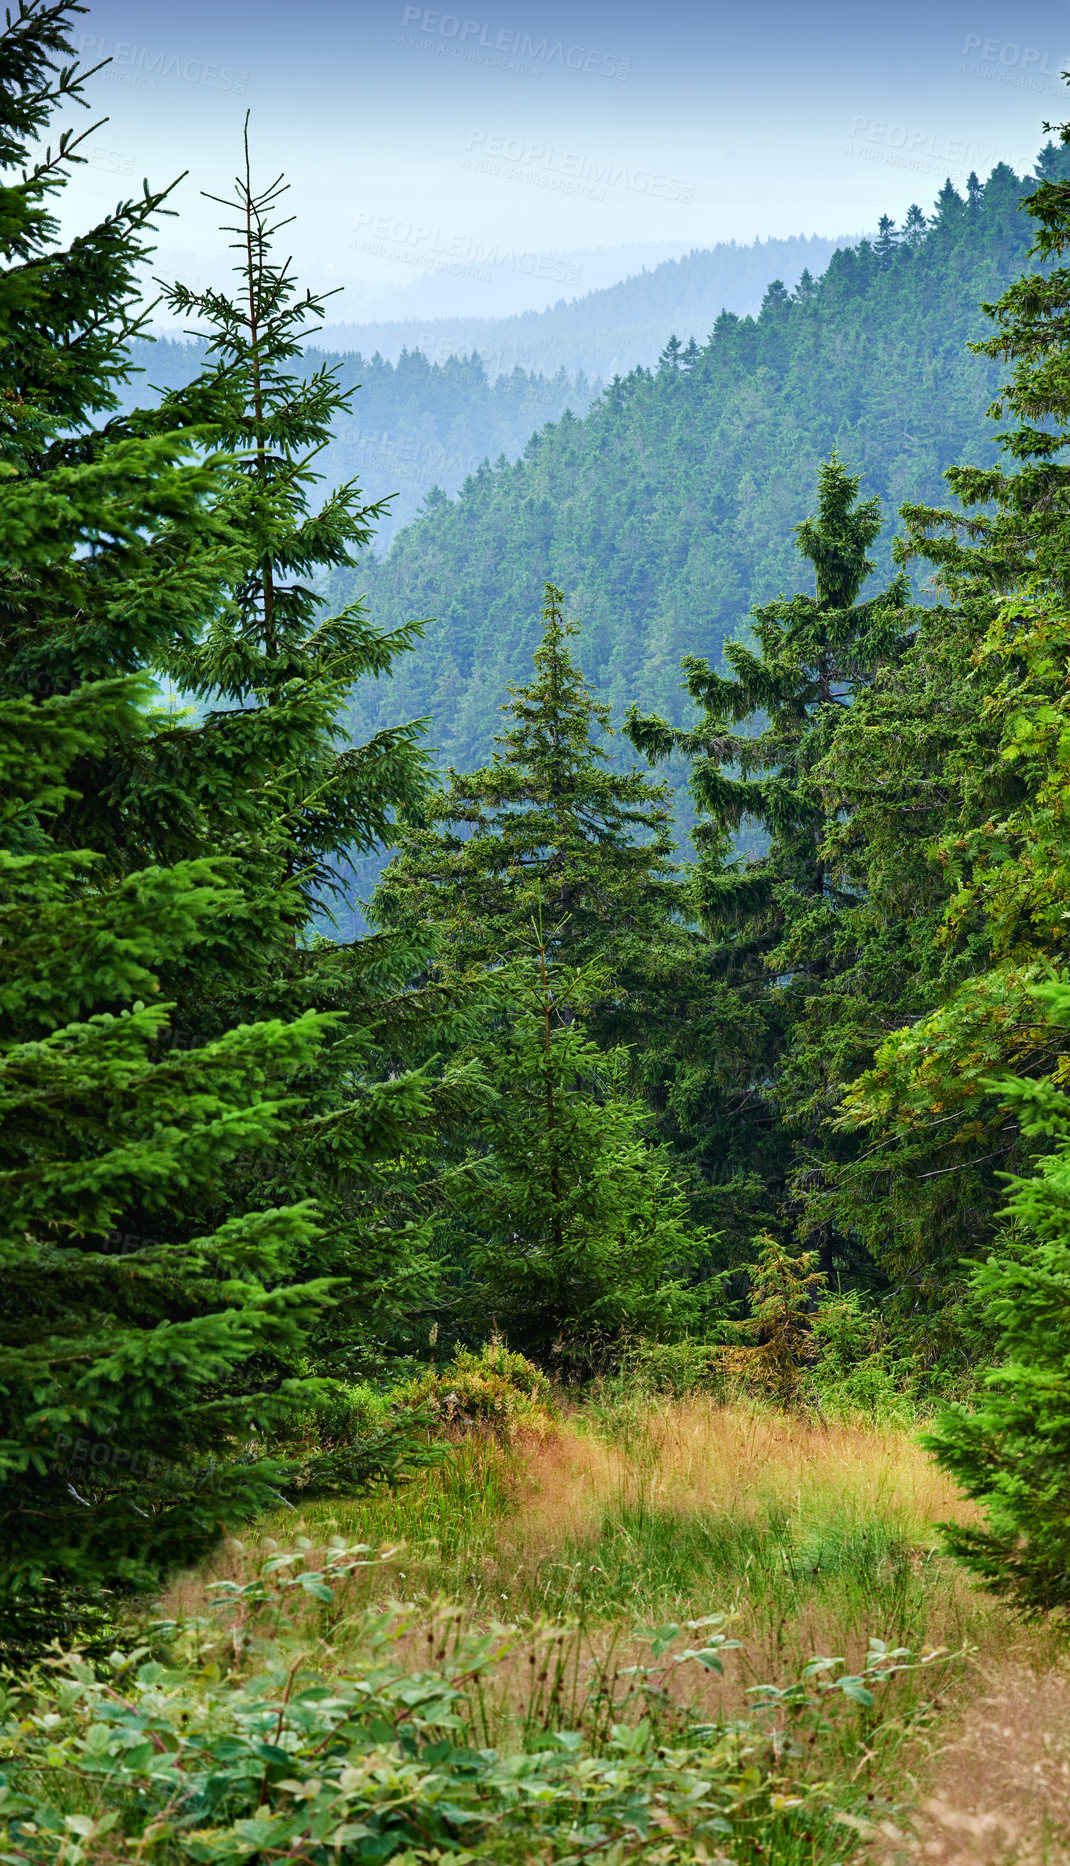 Buy stock photo Cropped shot of a huge forest